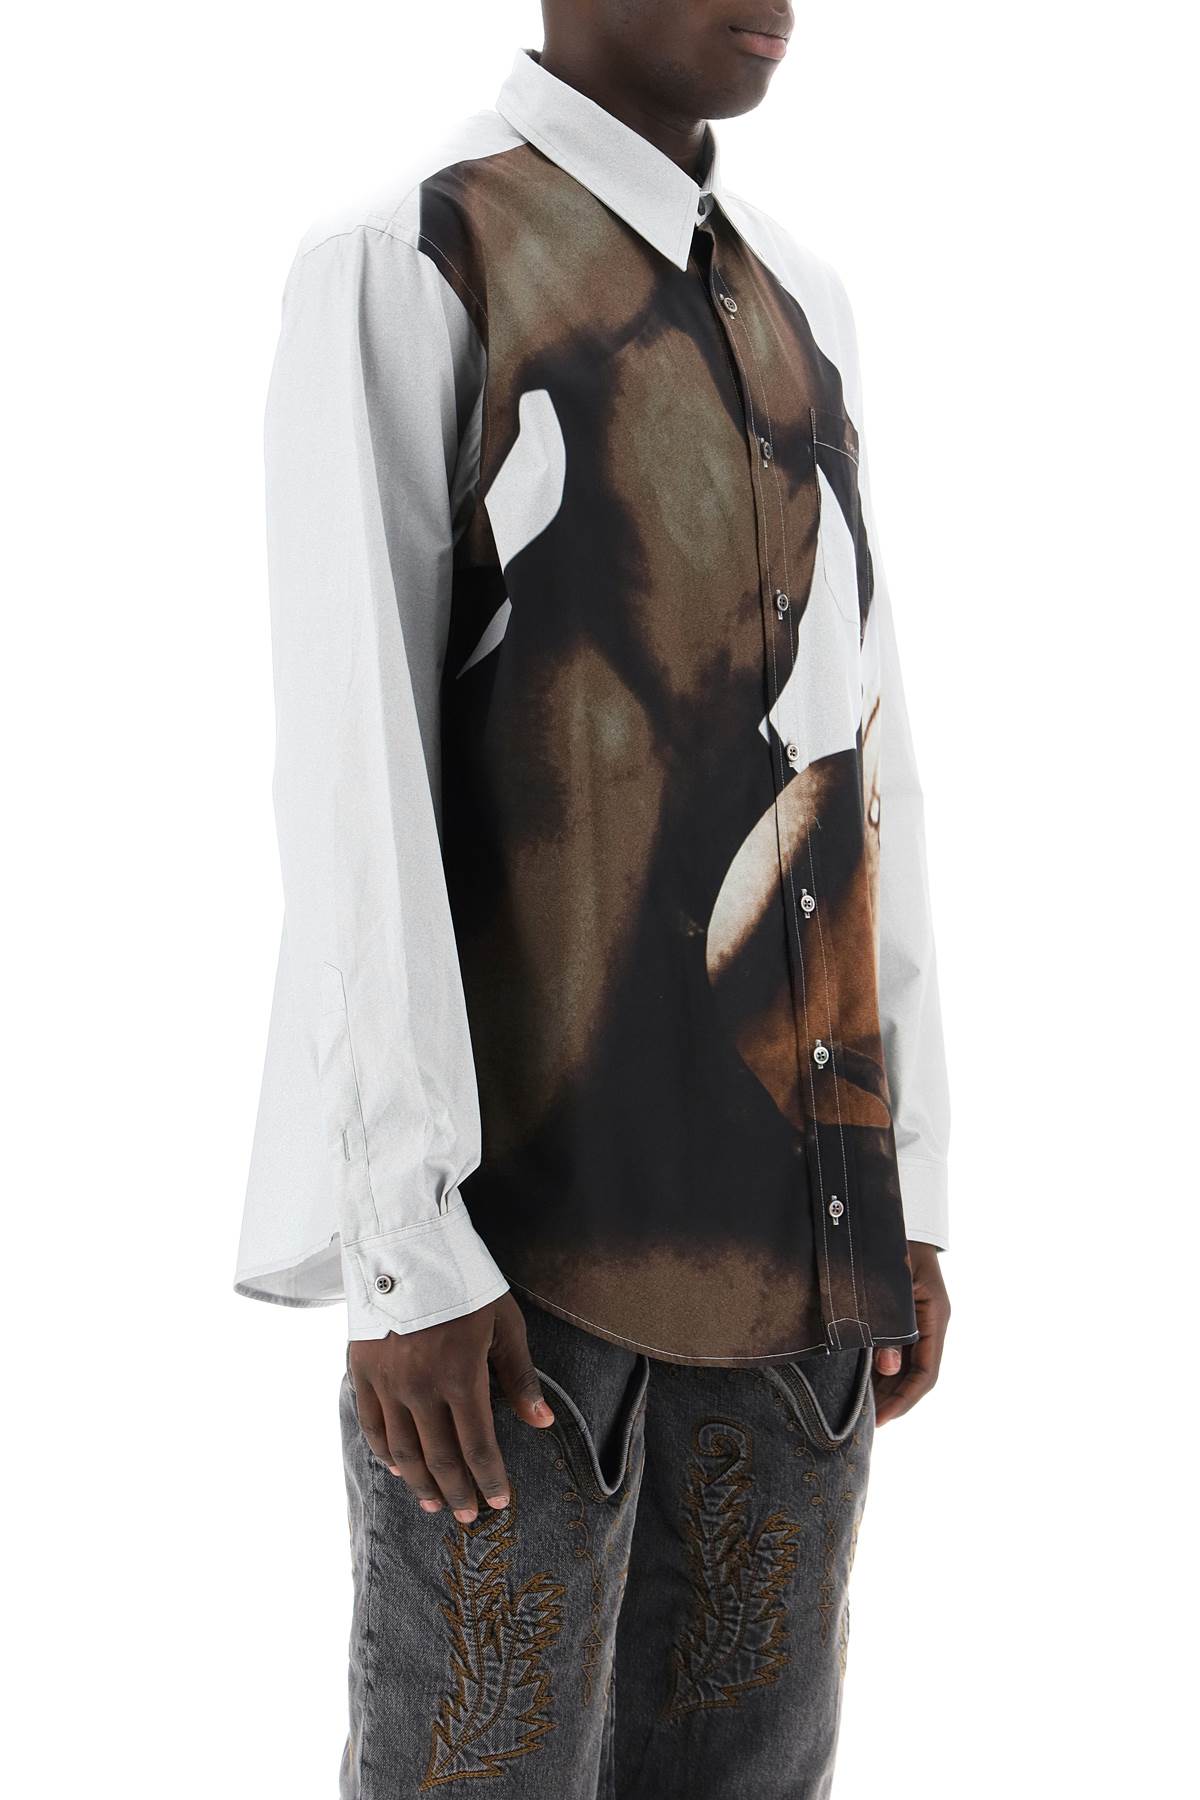 Y project body collage shirt-1